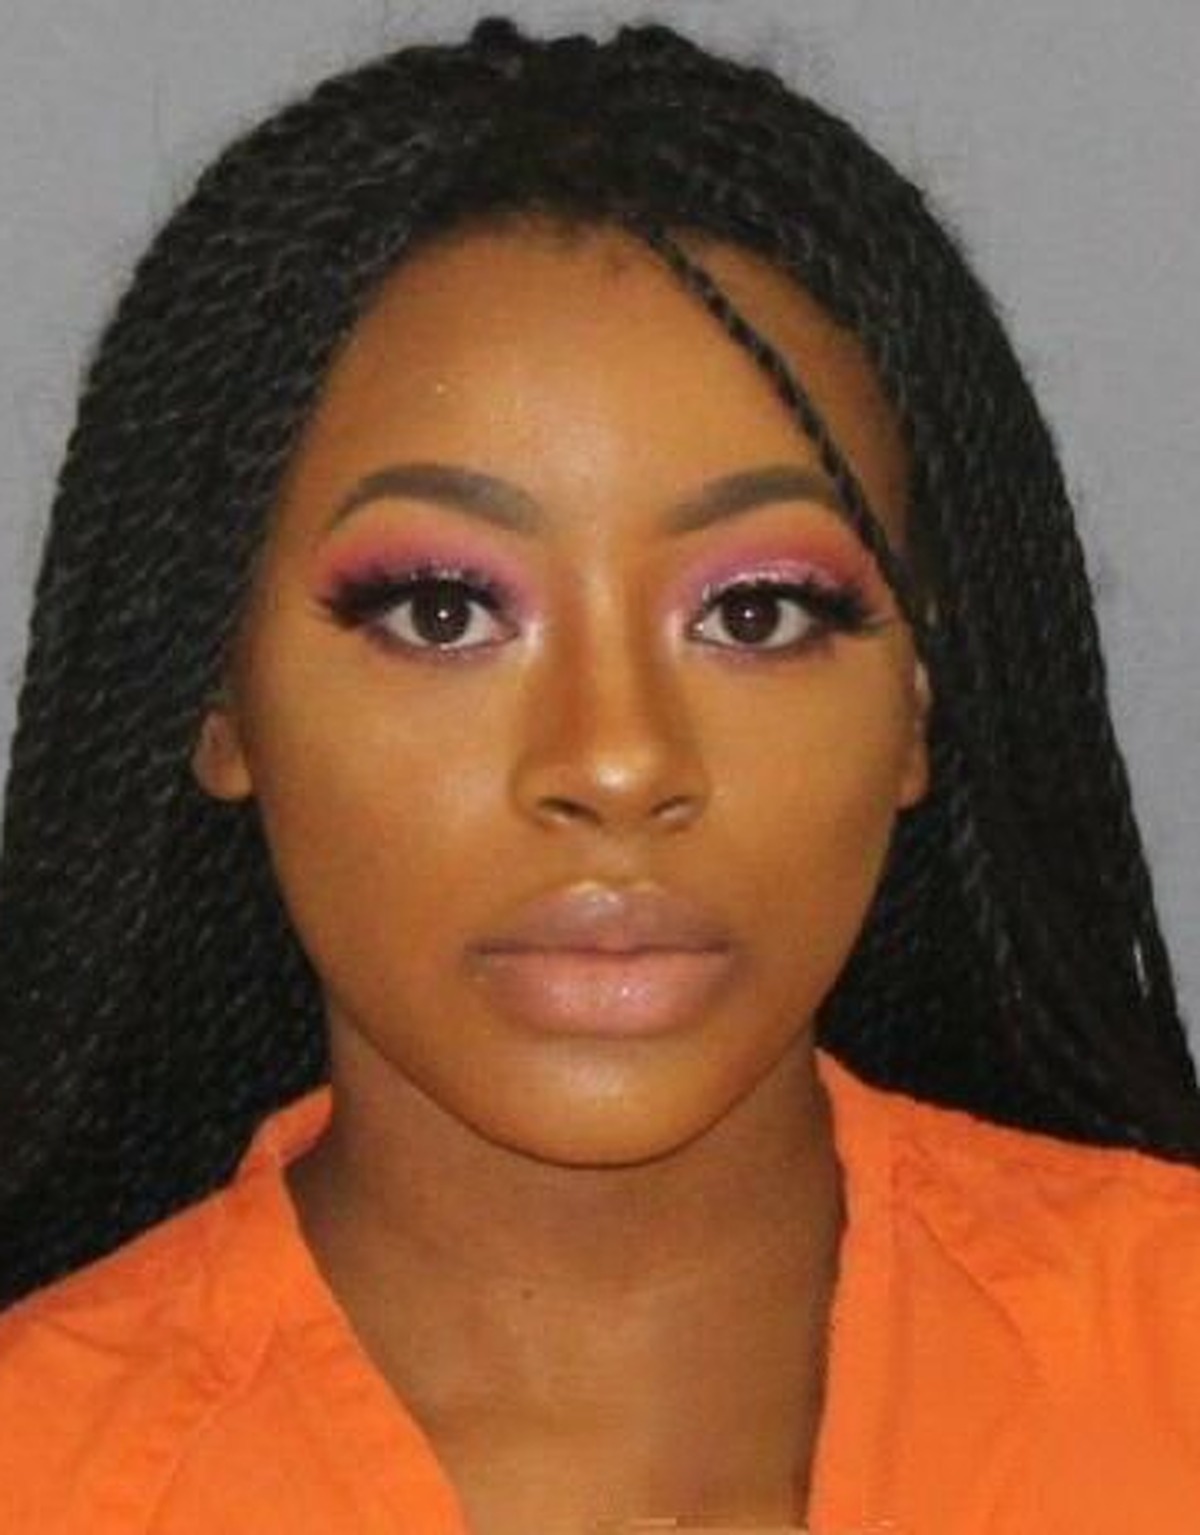 Texas woman's glamorous mugshot draws flood of requests for makeup